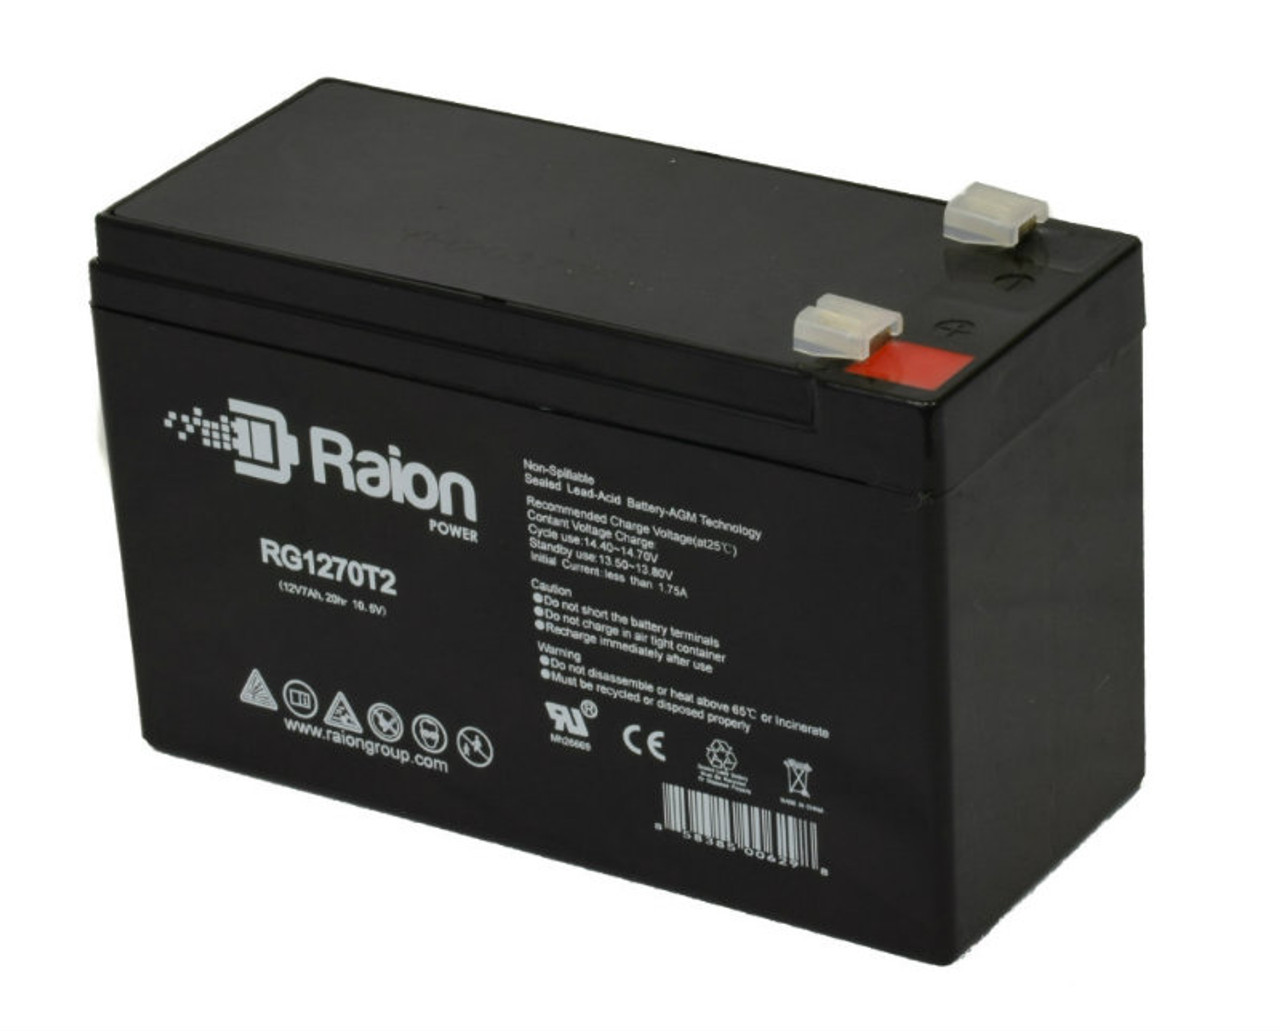 Raion Power Replacement 12V 7Ah Battery for Fengri 6-FM-6.0 F1 - 1 Pack